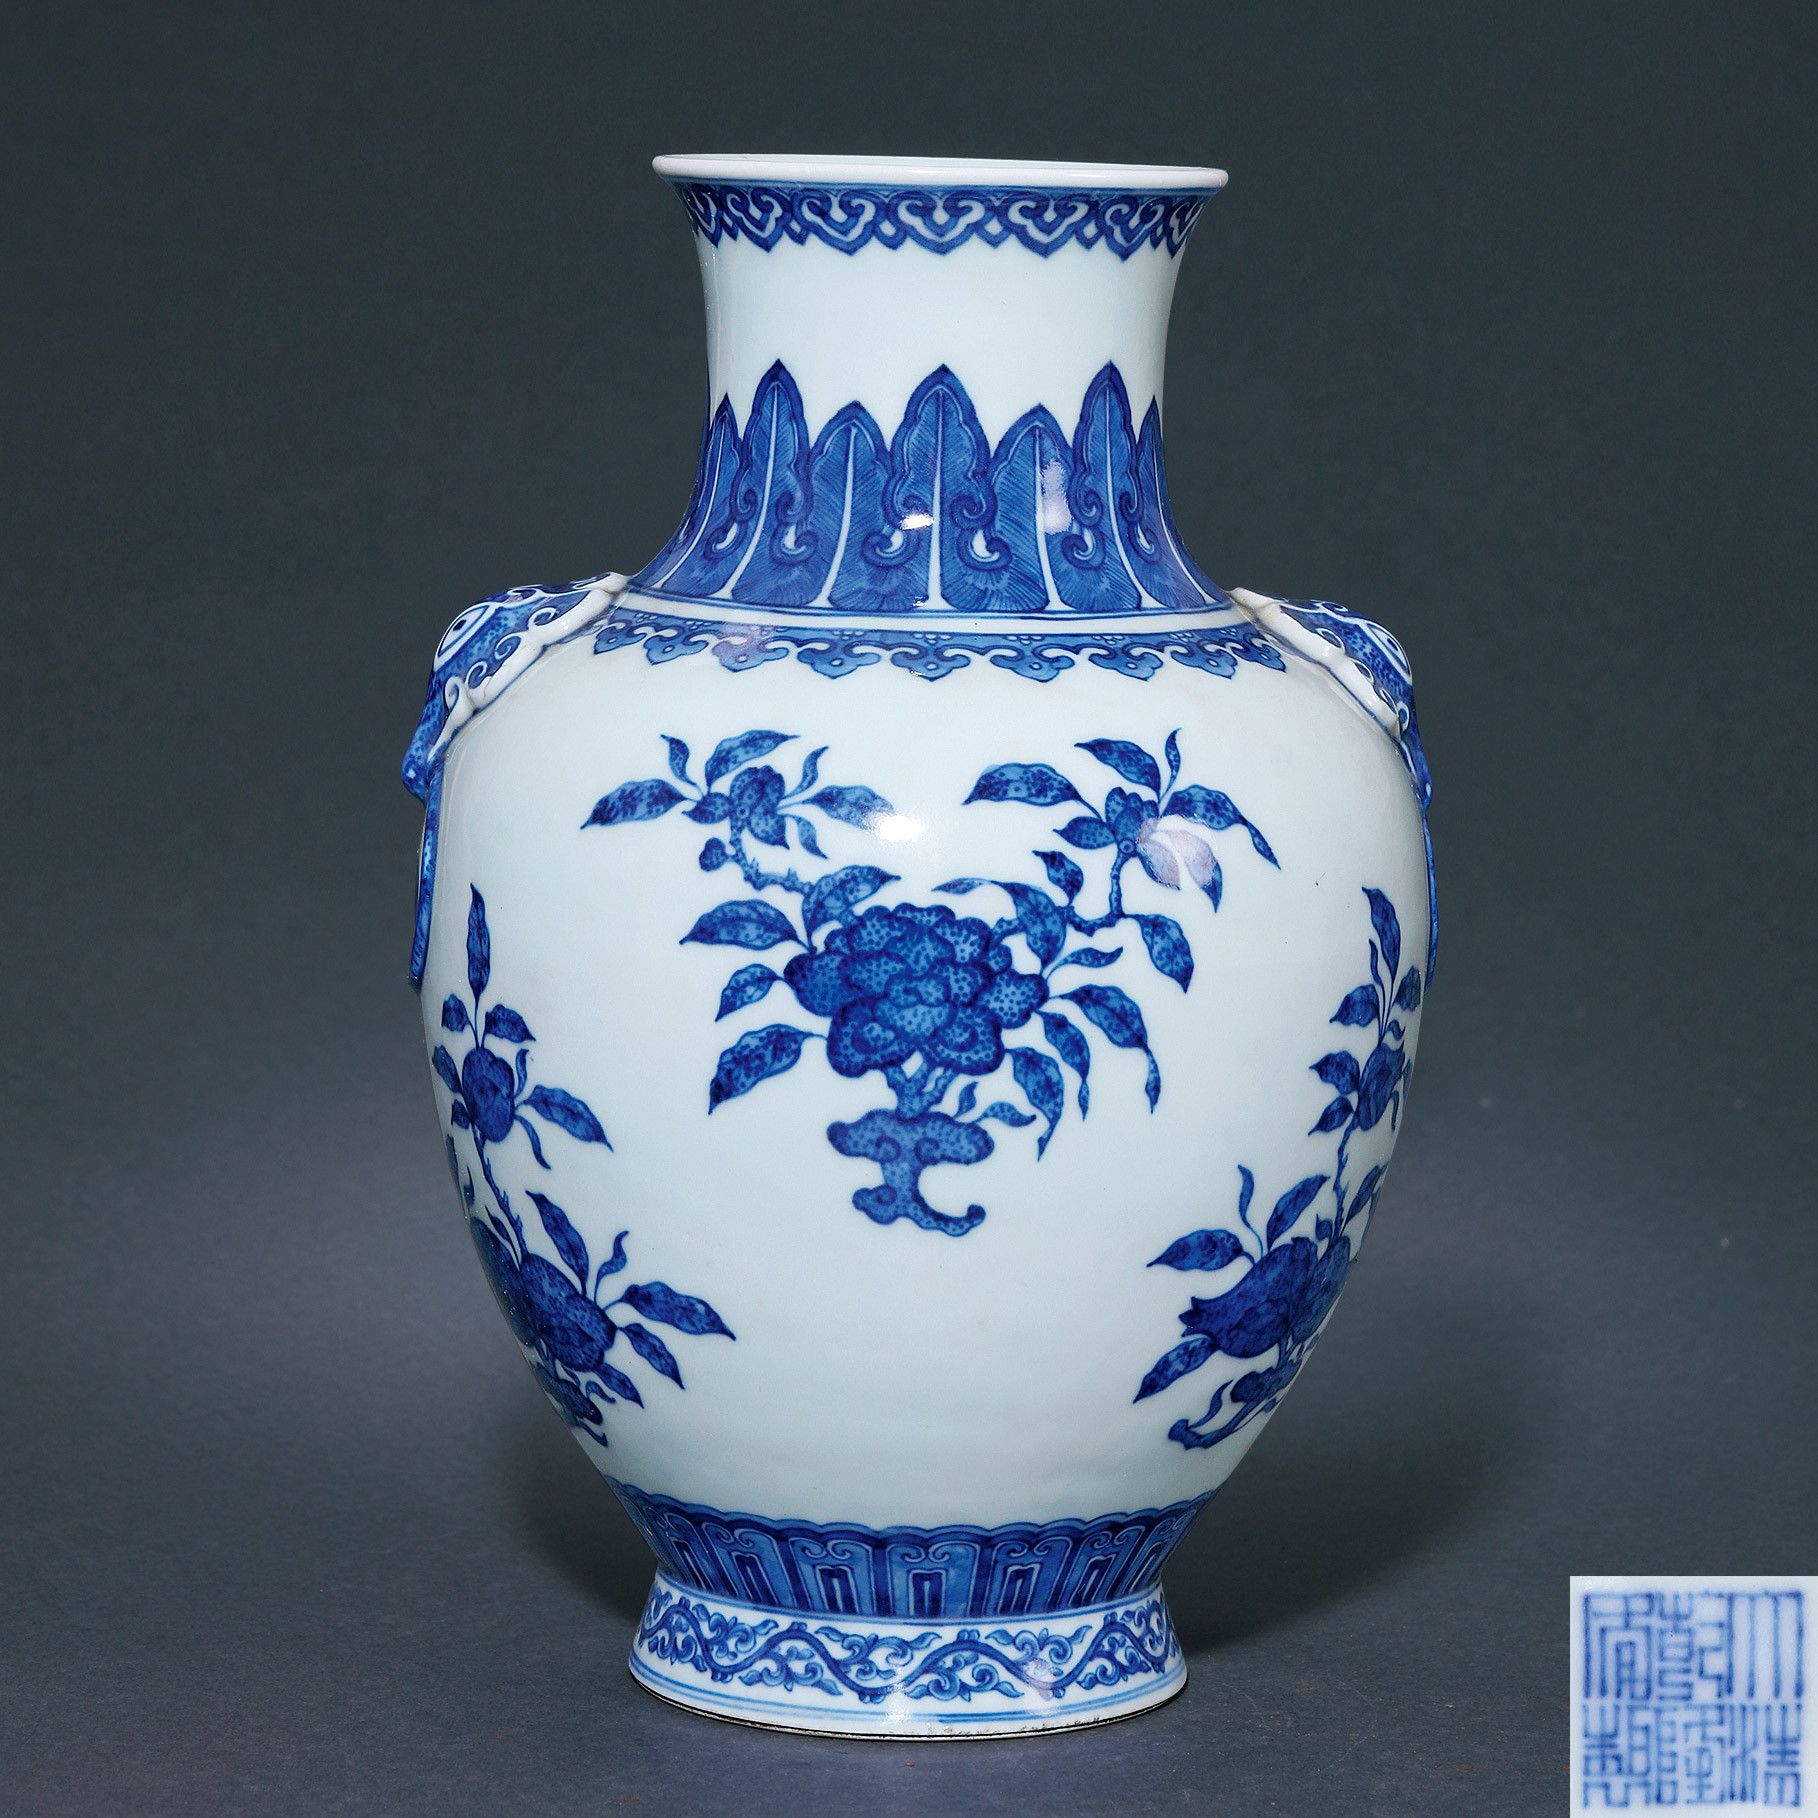 A BLUE AND WHITE ZUN SHAPED VASE WITH HANDLES IN SHAPE OF BEAST